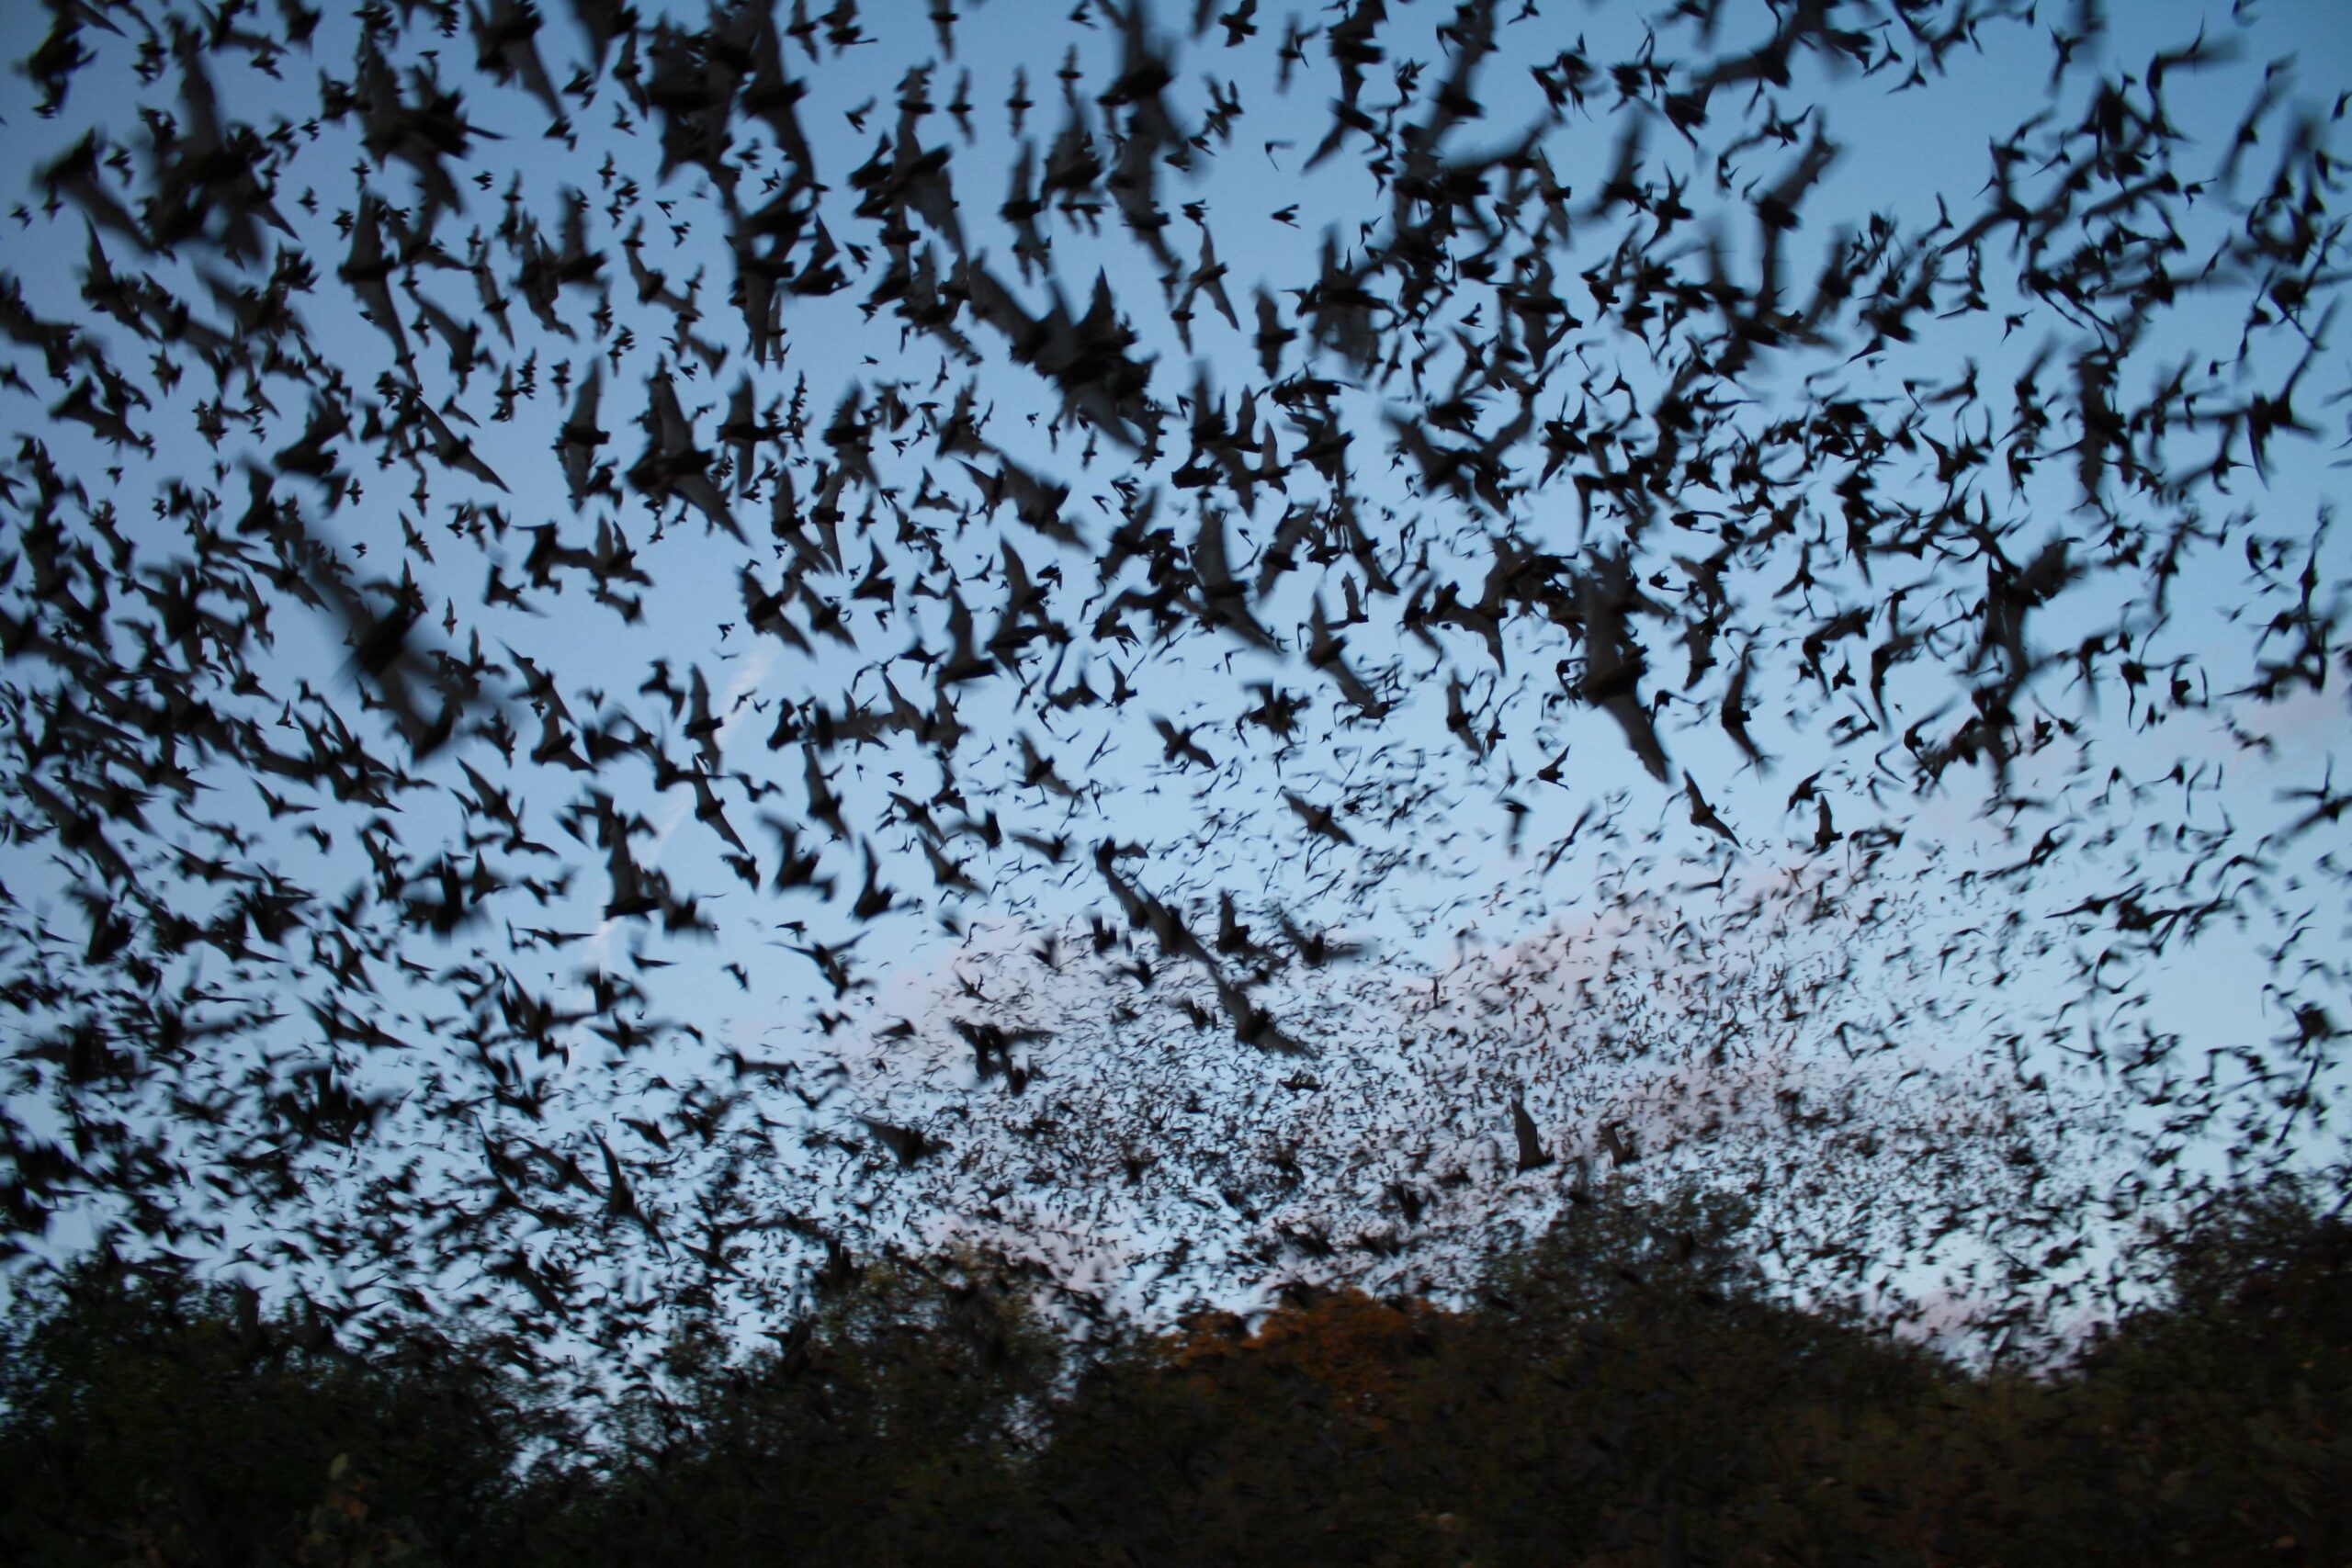 Bacteria Appears To Help Bats Fight Deadly White-Nose Syndrome